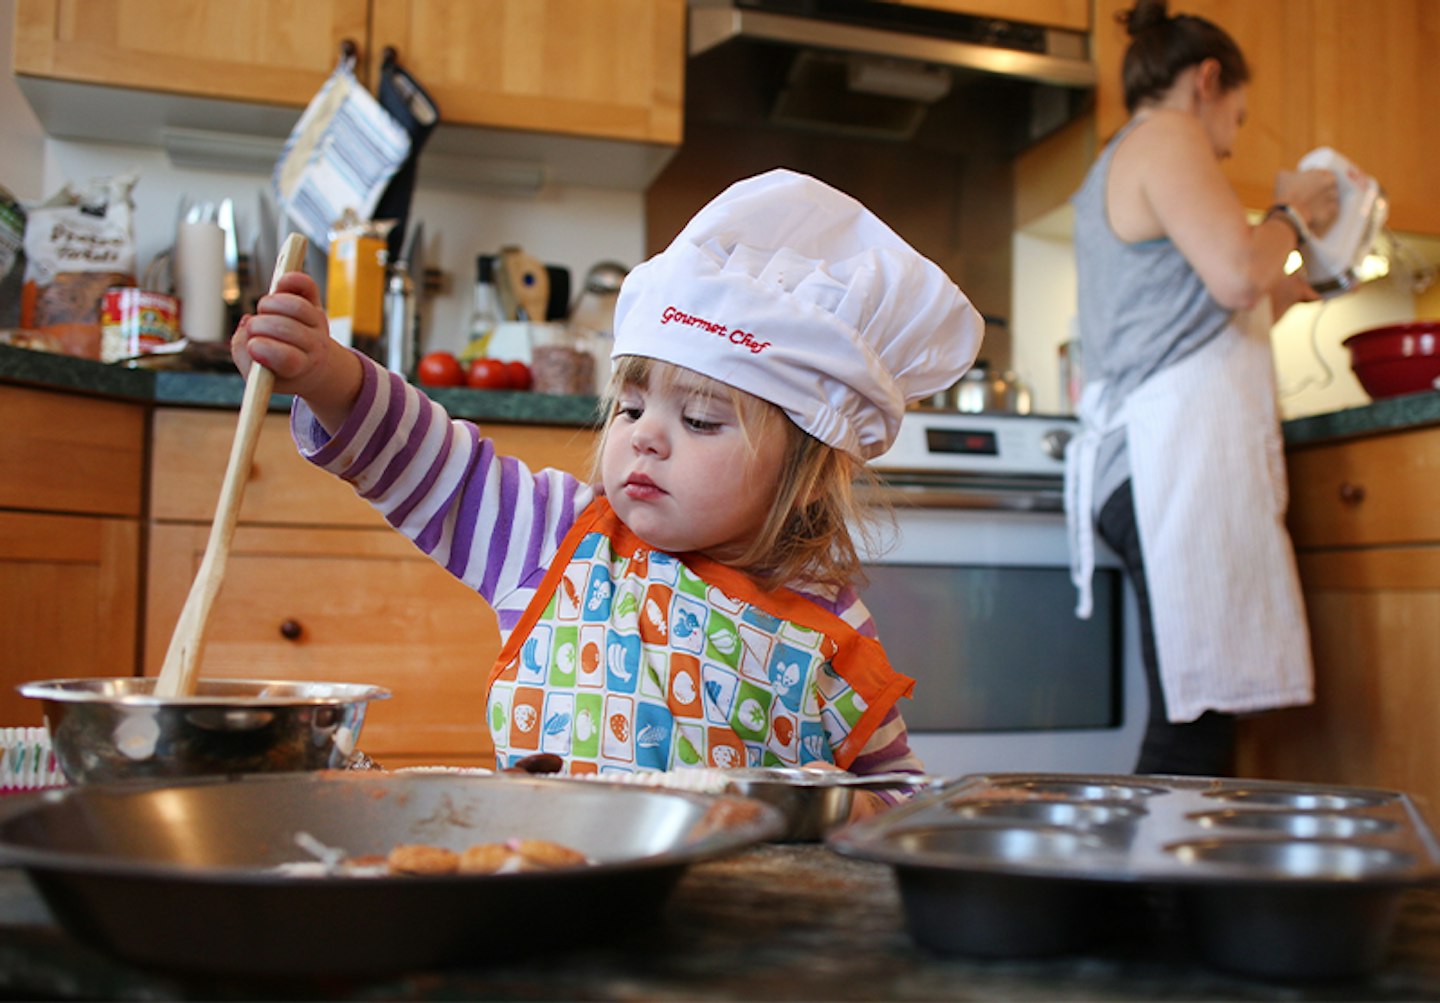 The Best Kids Cooking Sets - Yummy Toddler Food